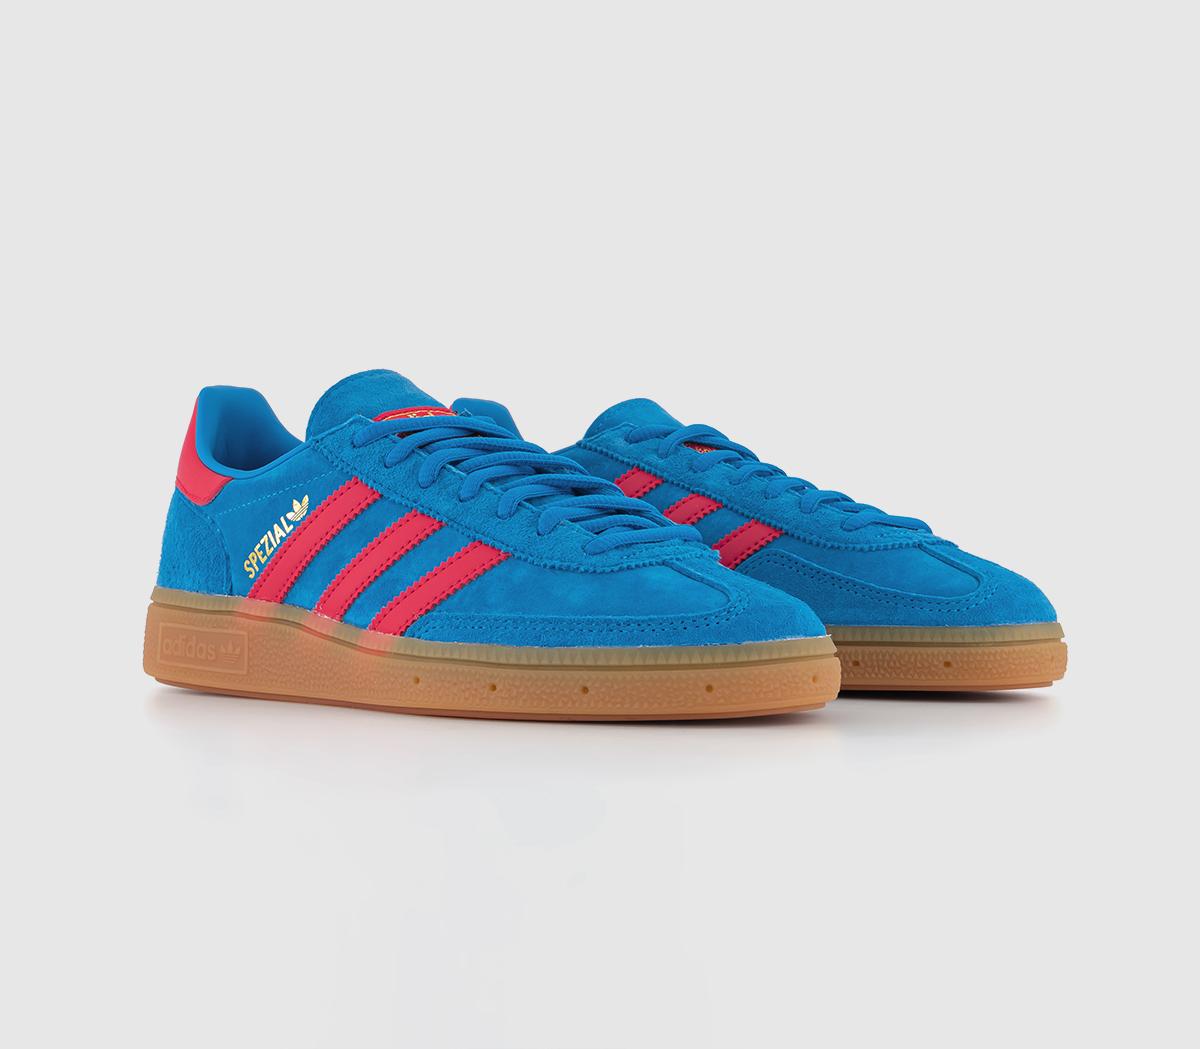 Adidas Mens Handball Spezial Trainers Sepia Rose Pewter In Blue Blue/Red, 11